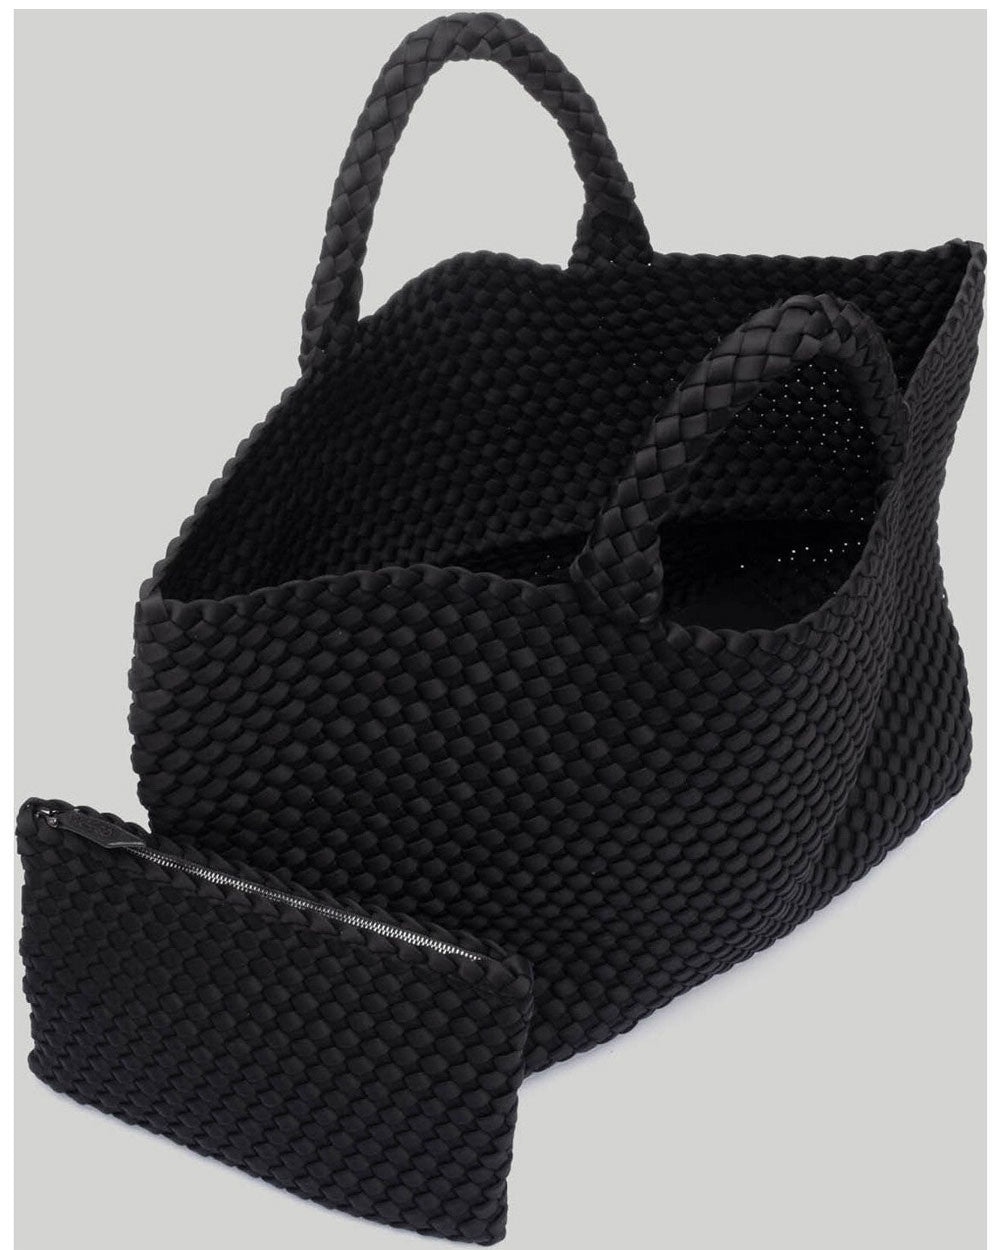 St. Barth’s Large Woven Tote in Onyx